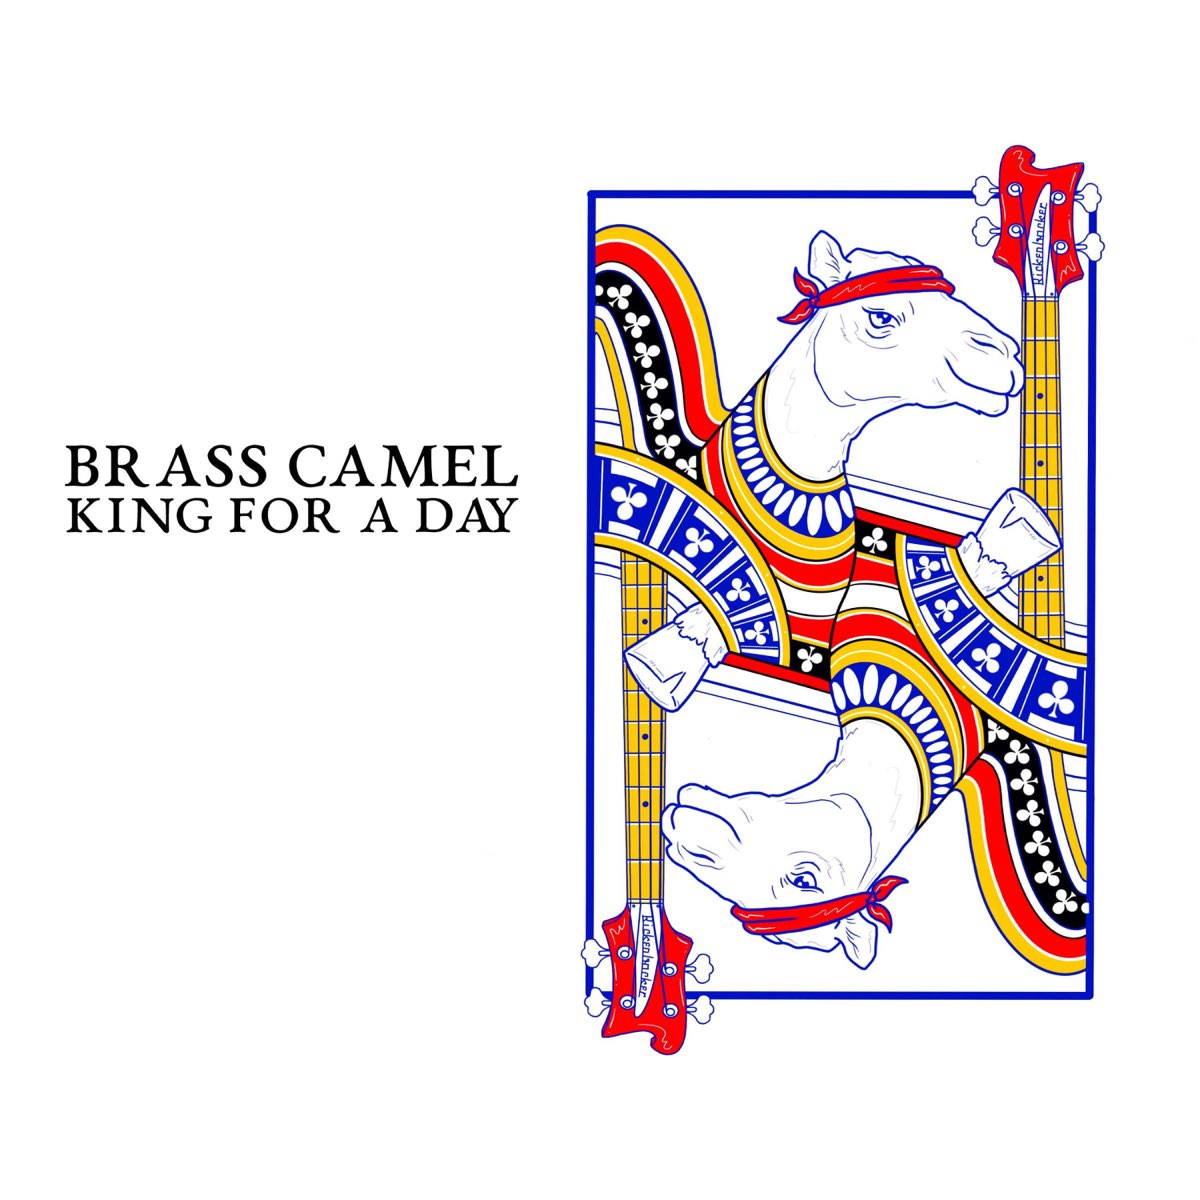 Brass Camel unveils their new single, King for a Day